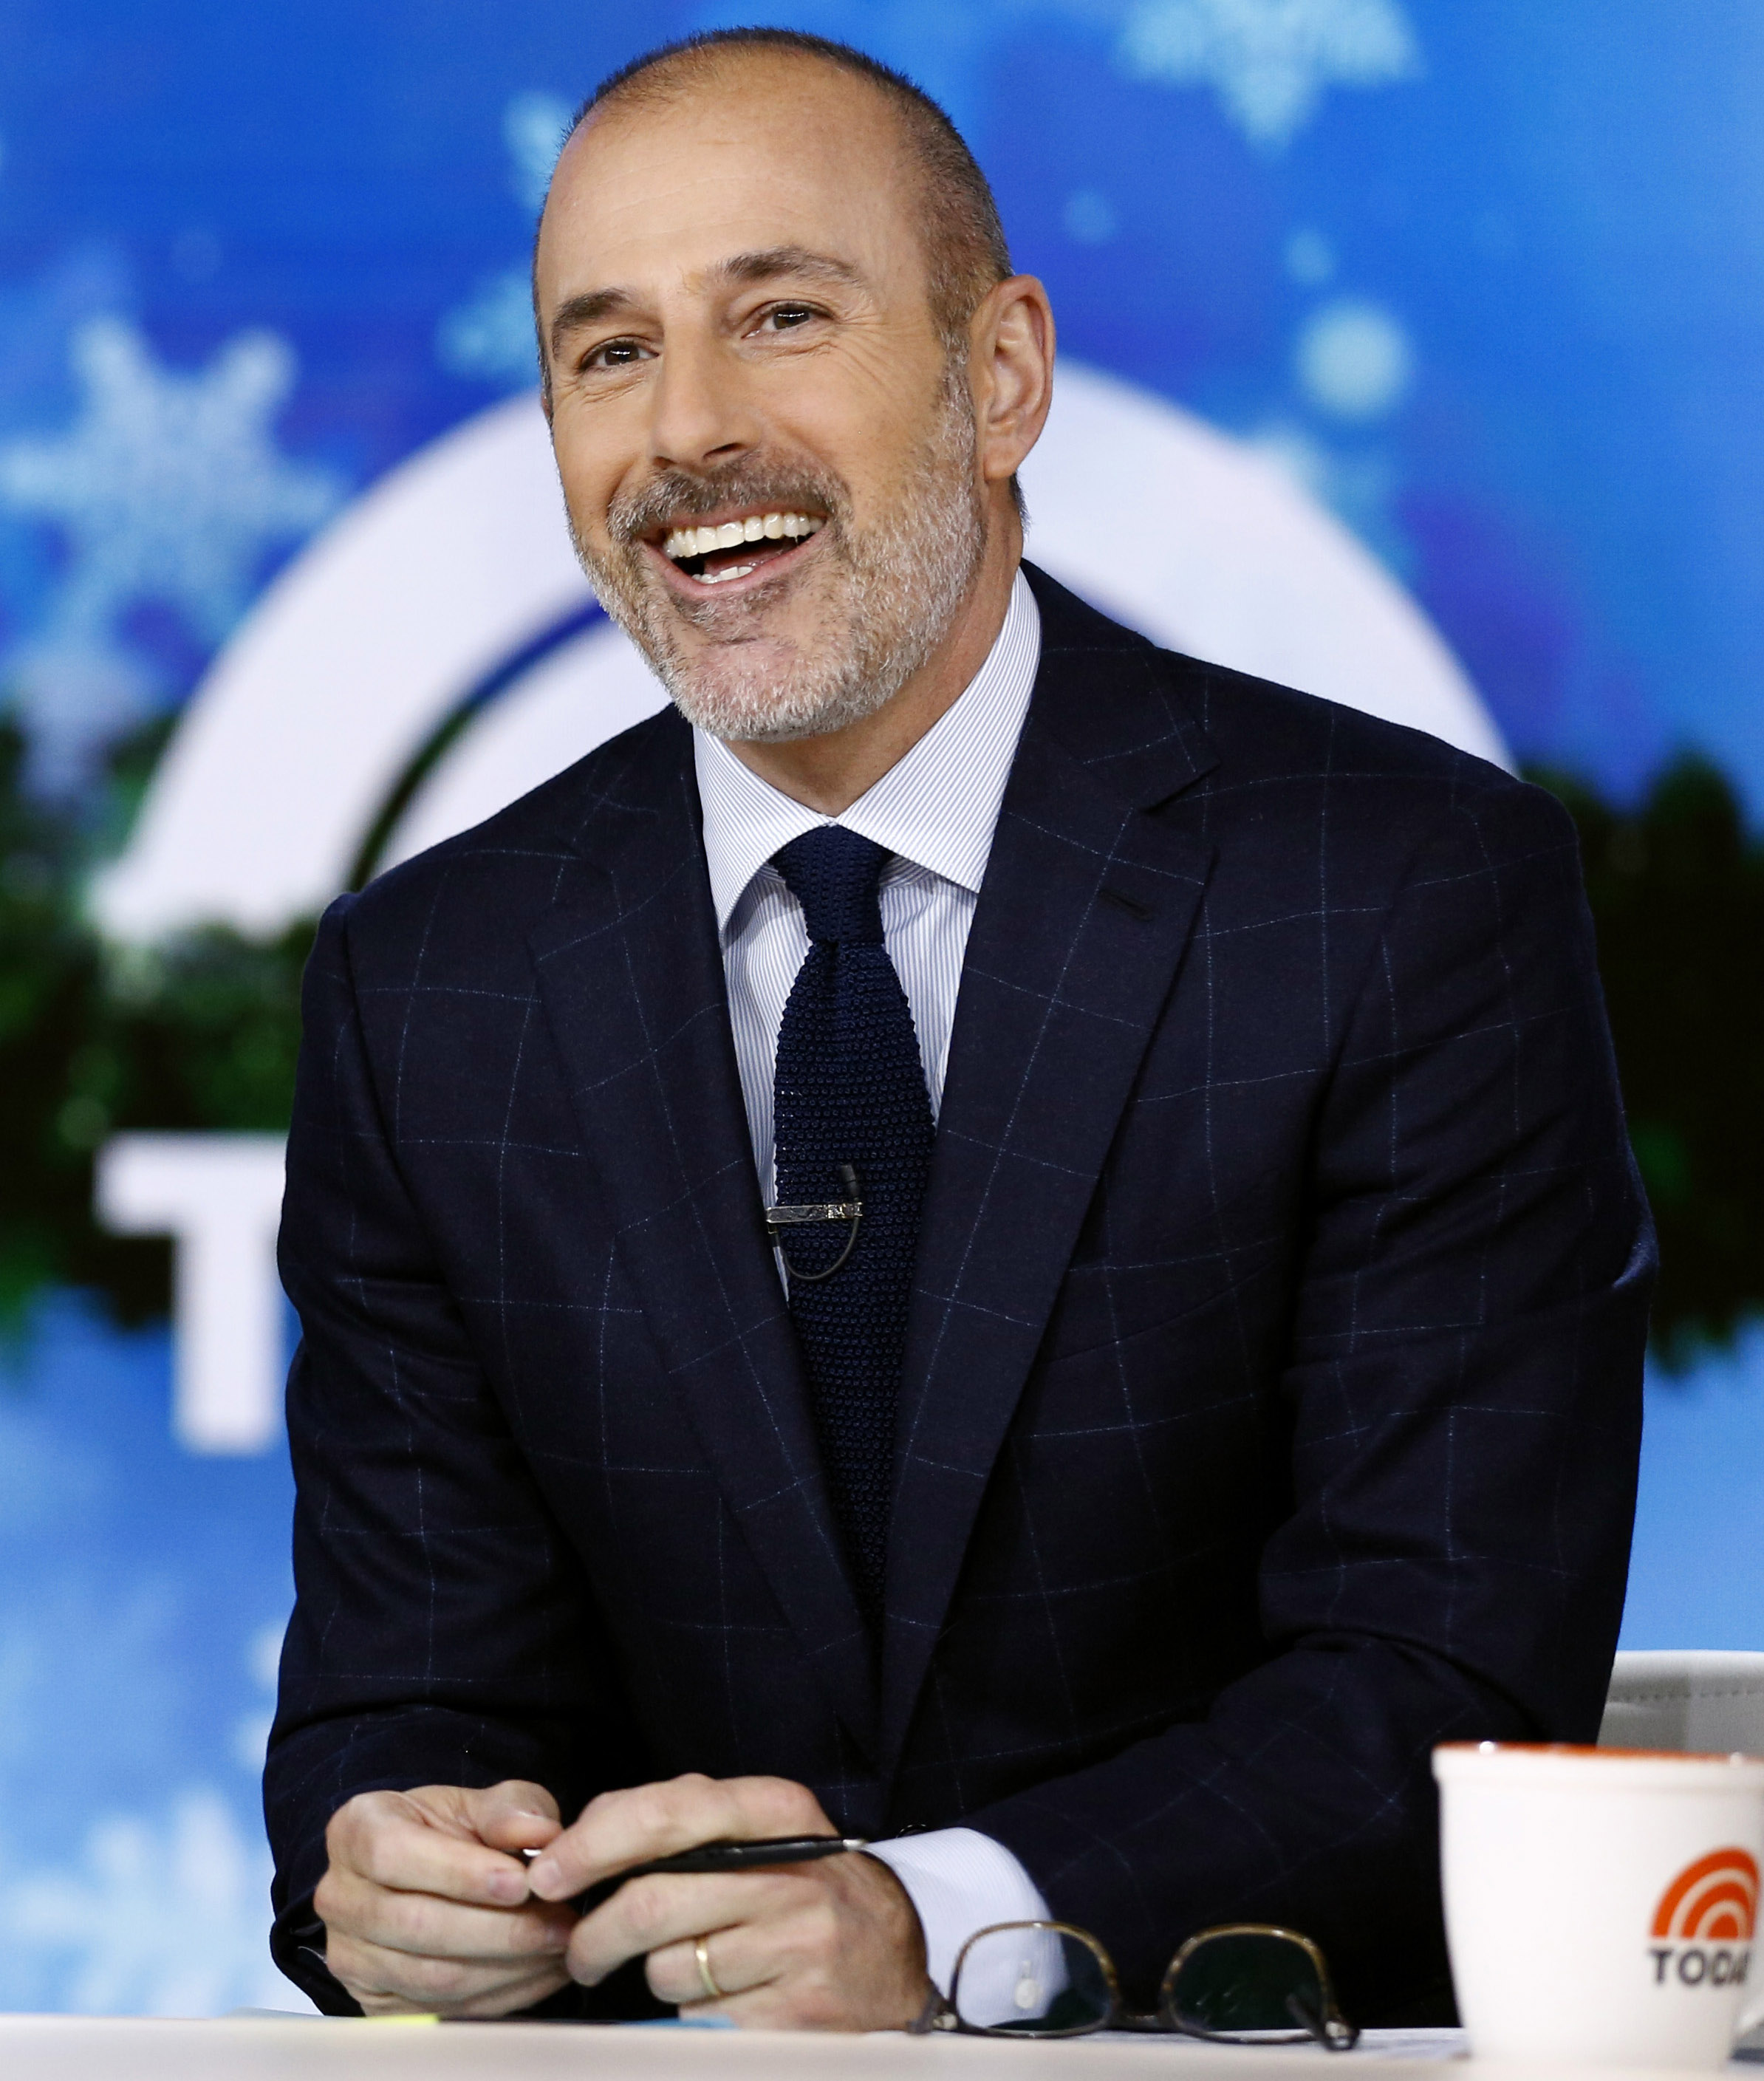 Matt Lauer Reveals Surprising Secrets About 'The Today Show' in New